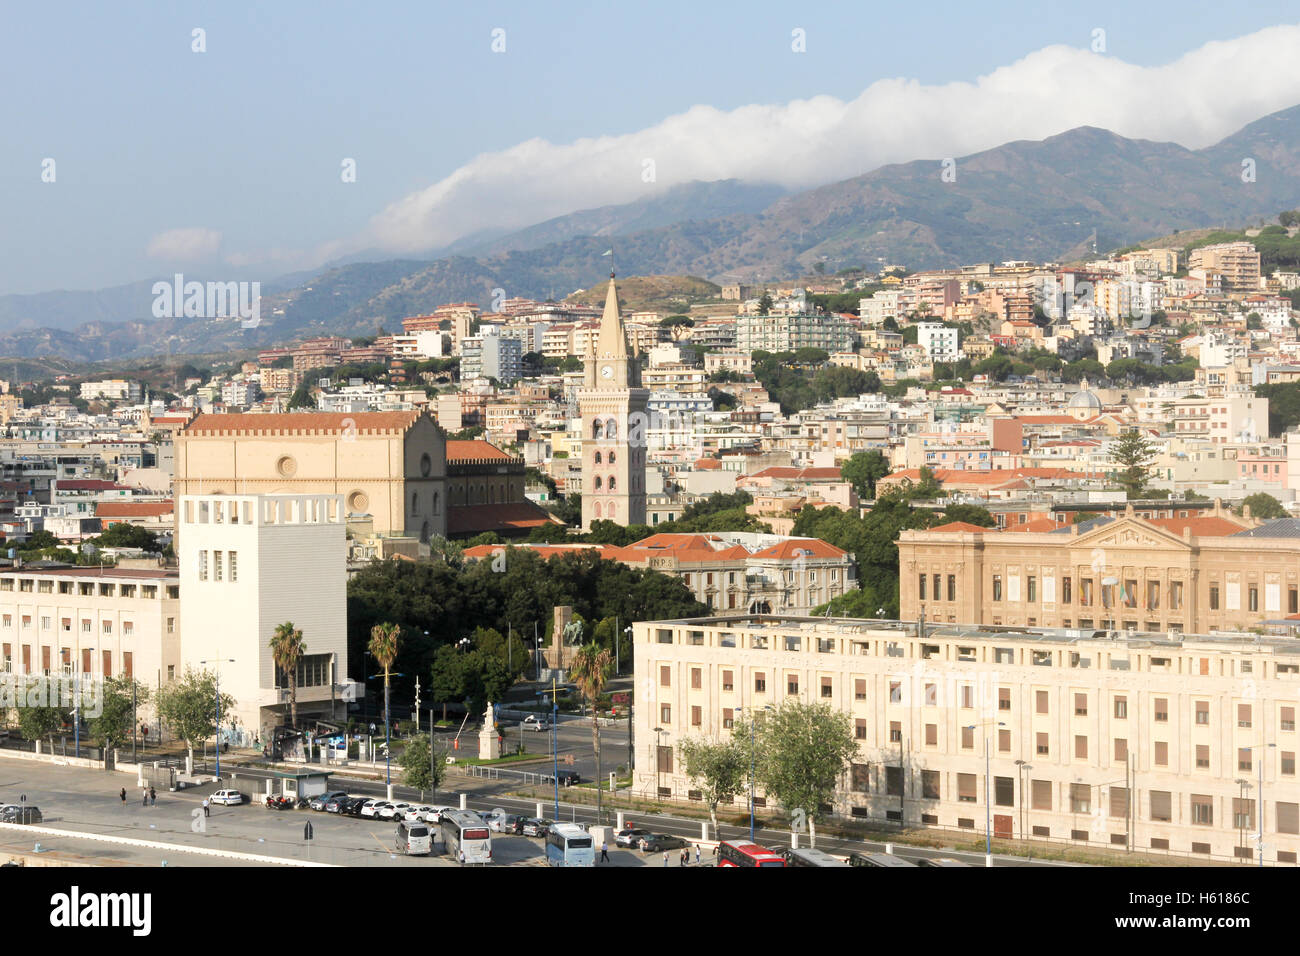 View over Messina with the cathedral clock tower in the centre, Sicily, Italy Stock Photo